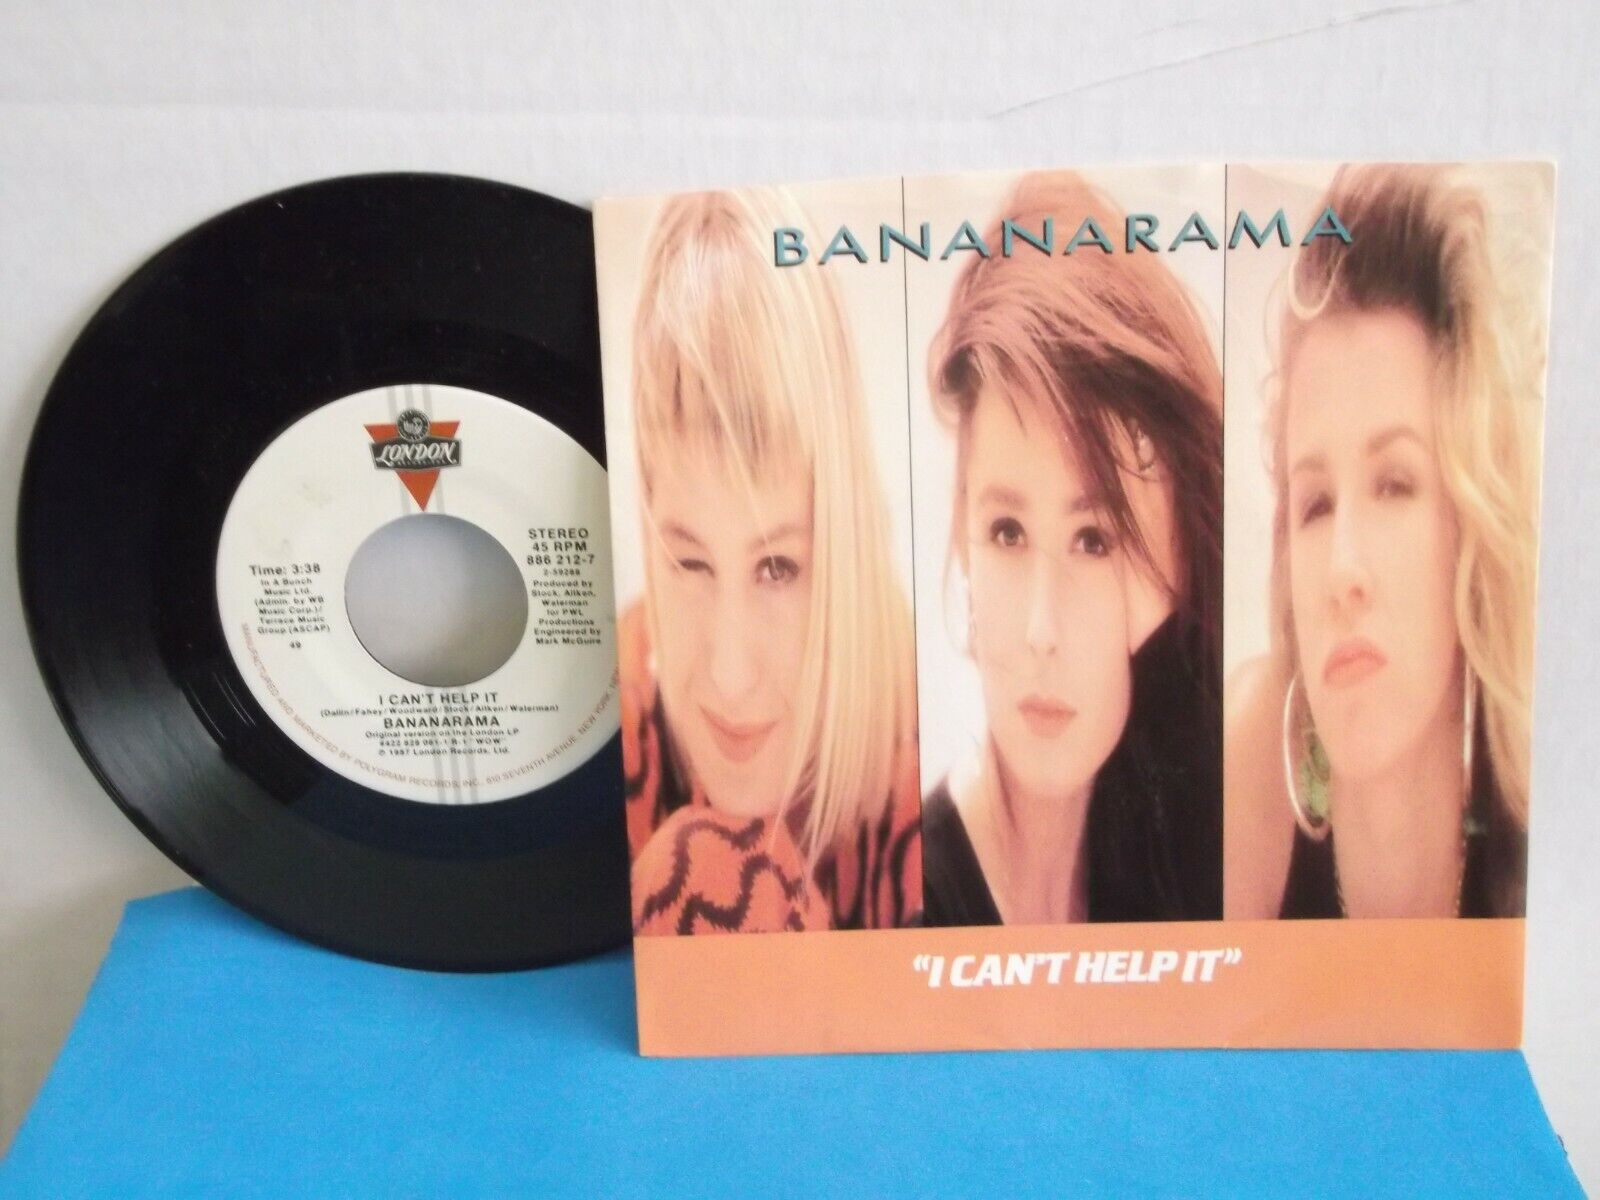 Bananarama,London, "I Can't Help It",US,7" 45 with P/S, 80s pop classic, Mint